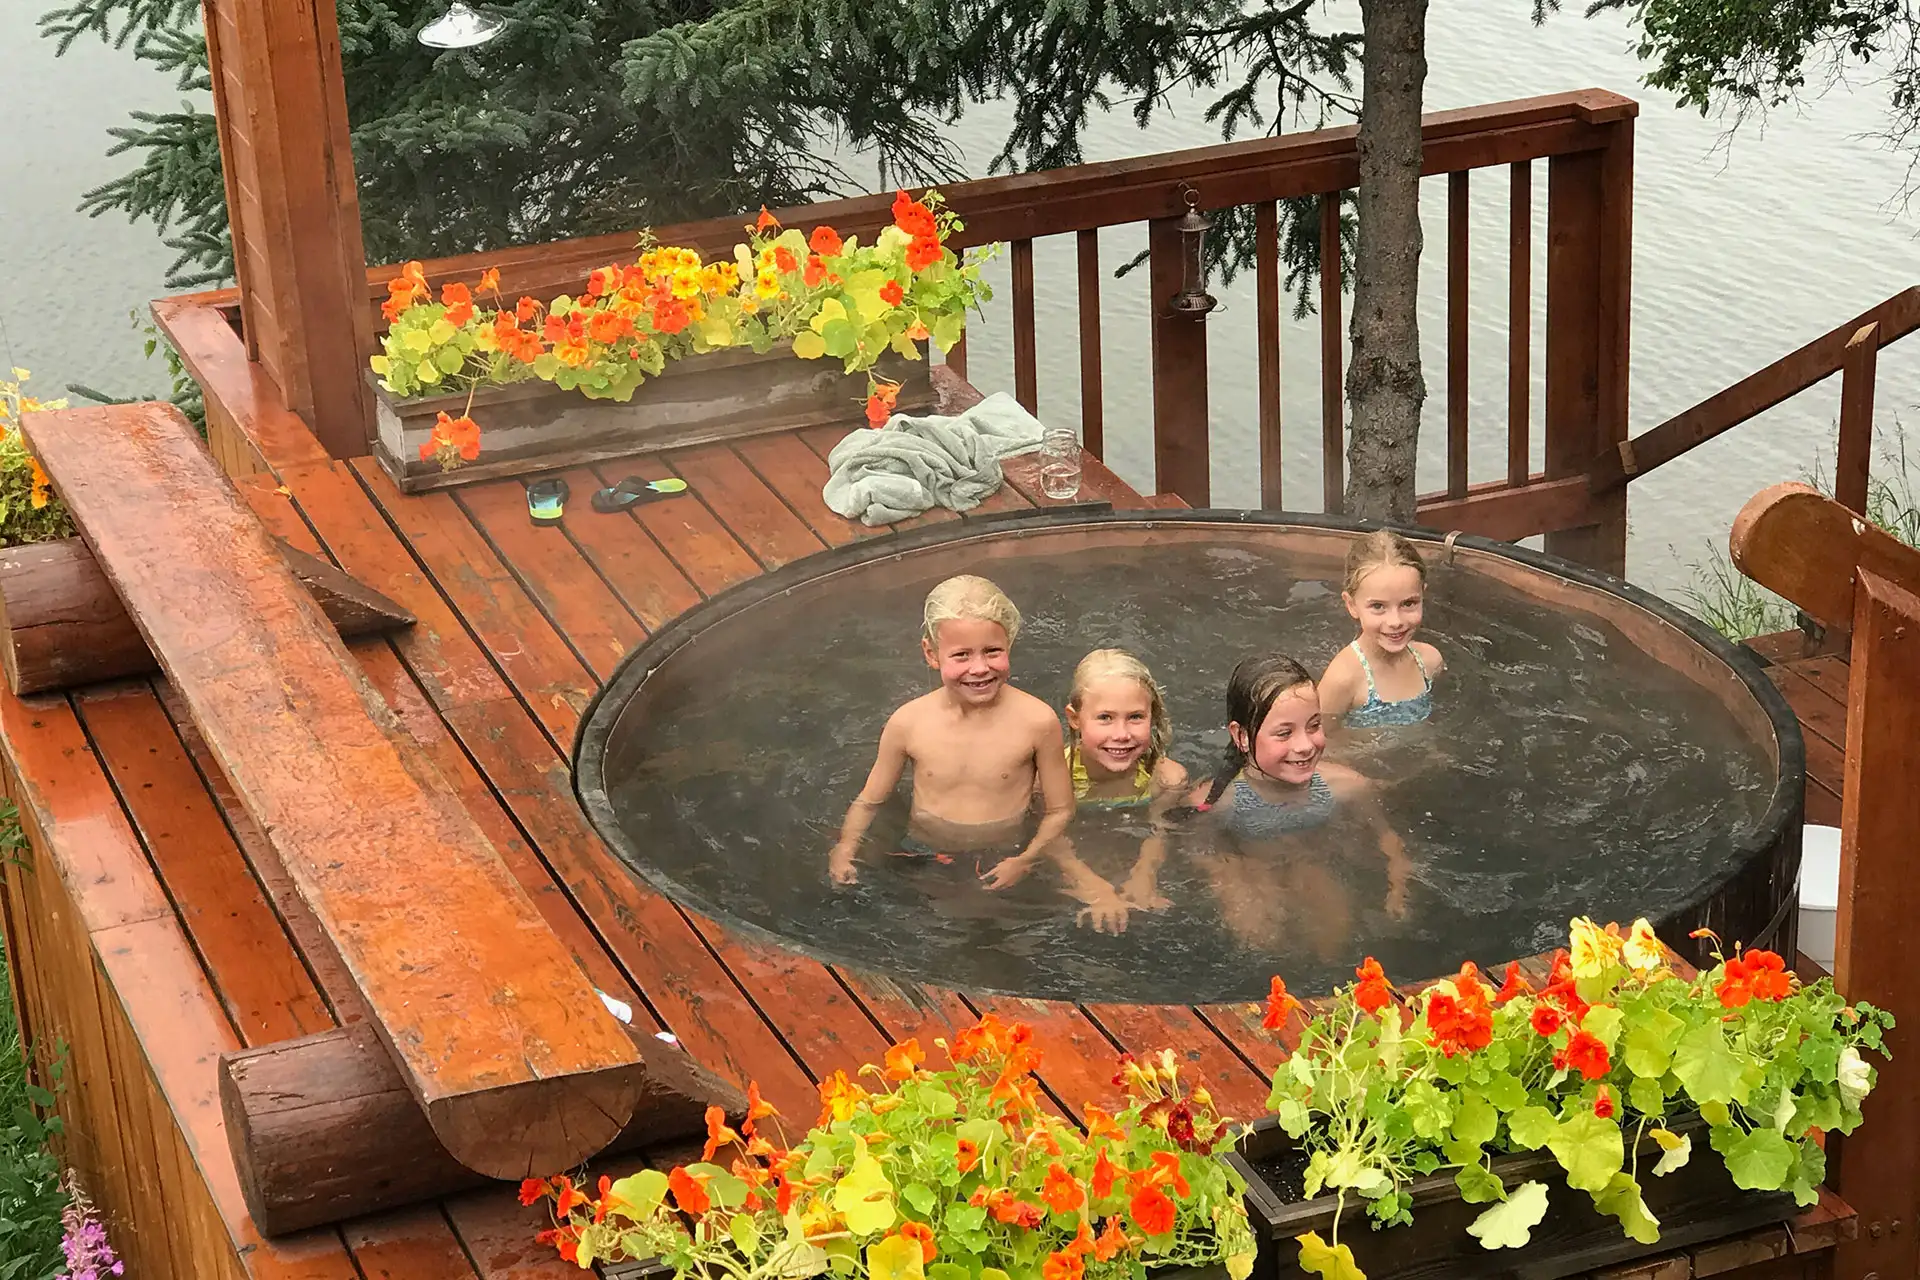 Kids in Hot Tub at Tordrillo Mountain Lodge; Courtesy of Tordrillo Mountain Lodge